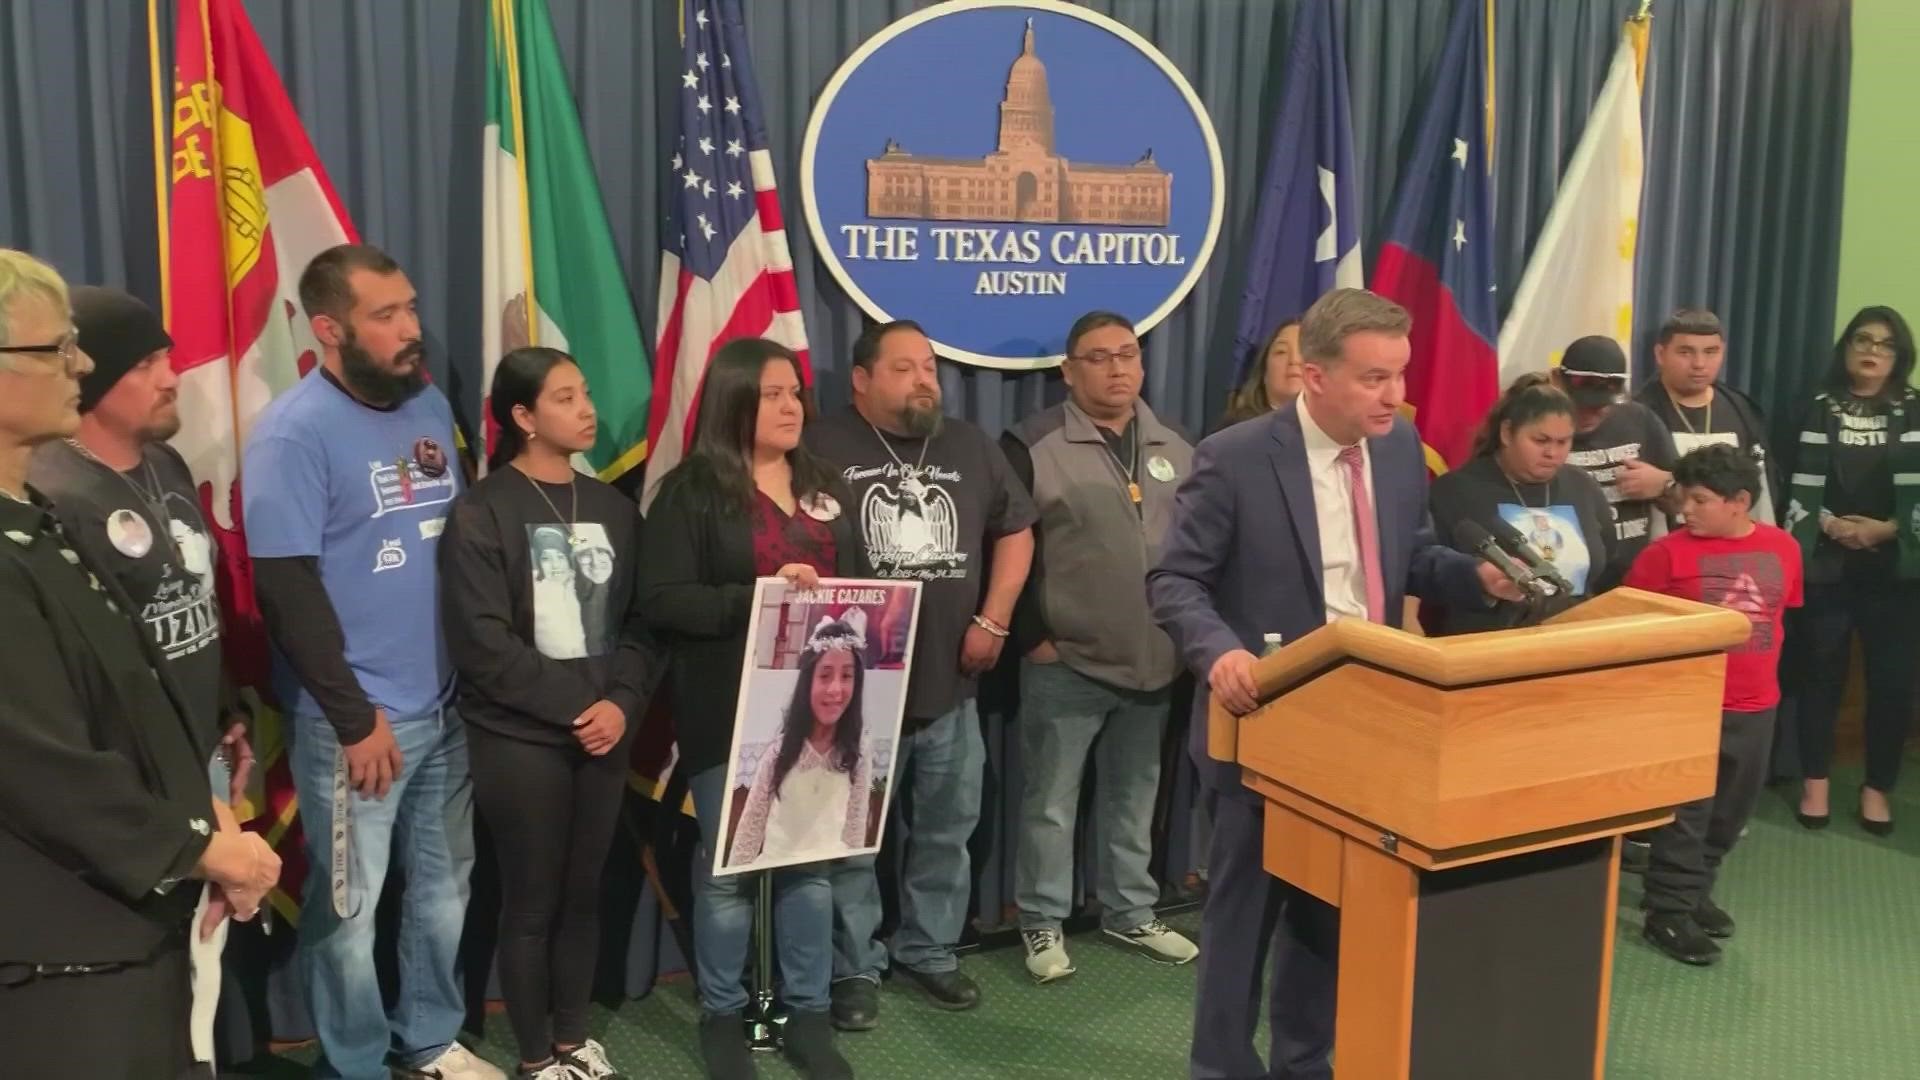 Families of the Uvalde shooting victims were in Austin as four pieces of legislation were filed to curb gun violence and hold agencies accountable for negligence.